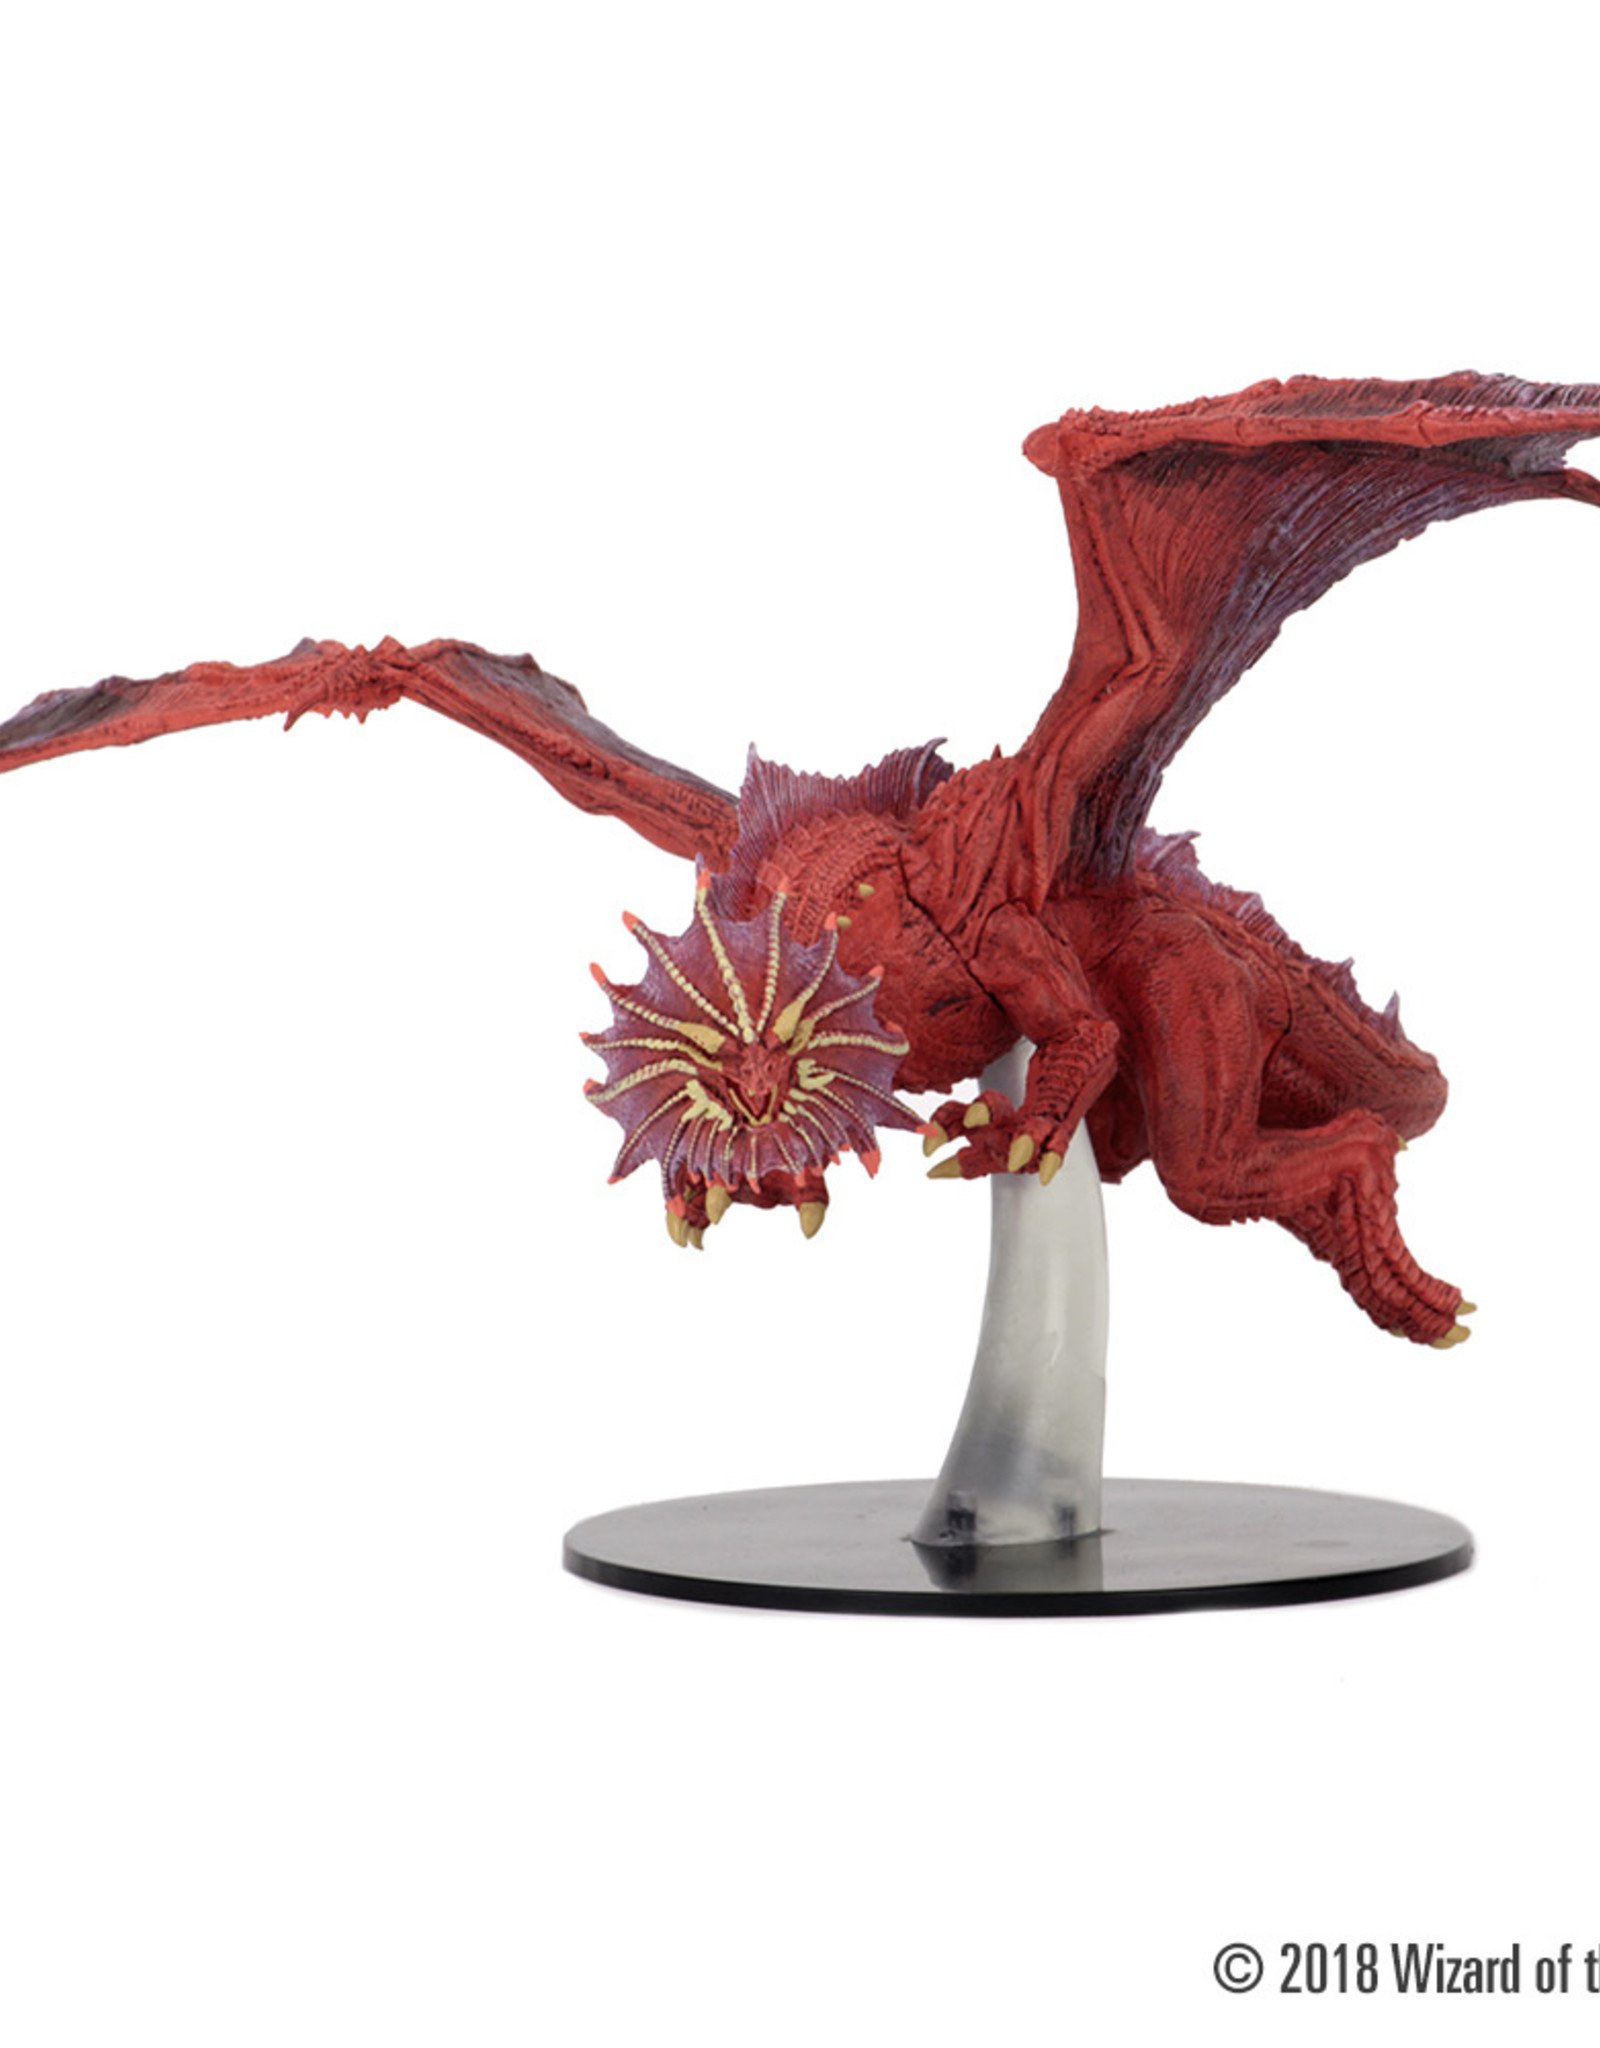 Wizkids D&D Minatures: Icons of the Realms: Guilds of Ravnica - Niv-Mizzet